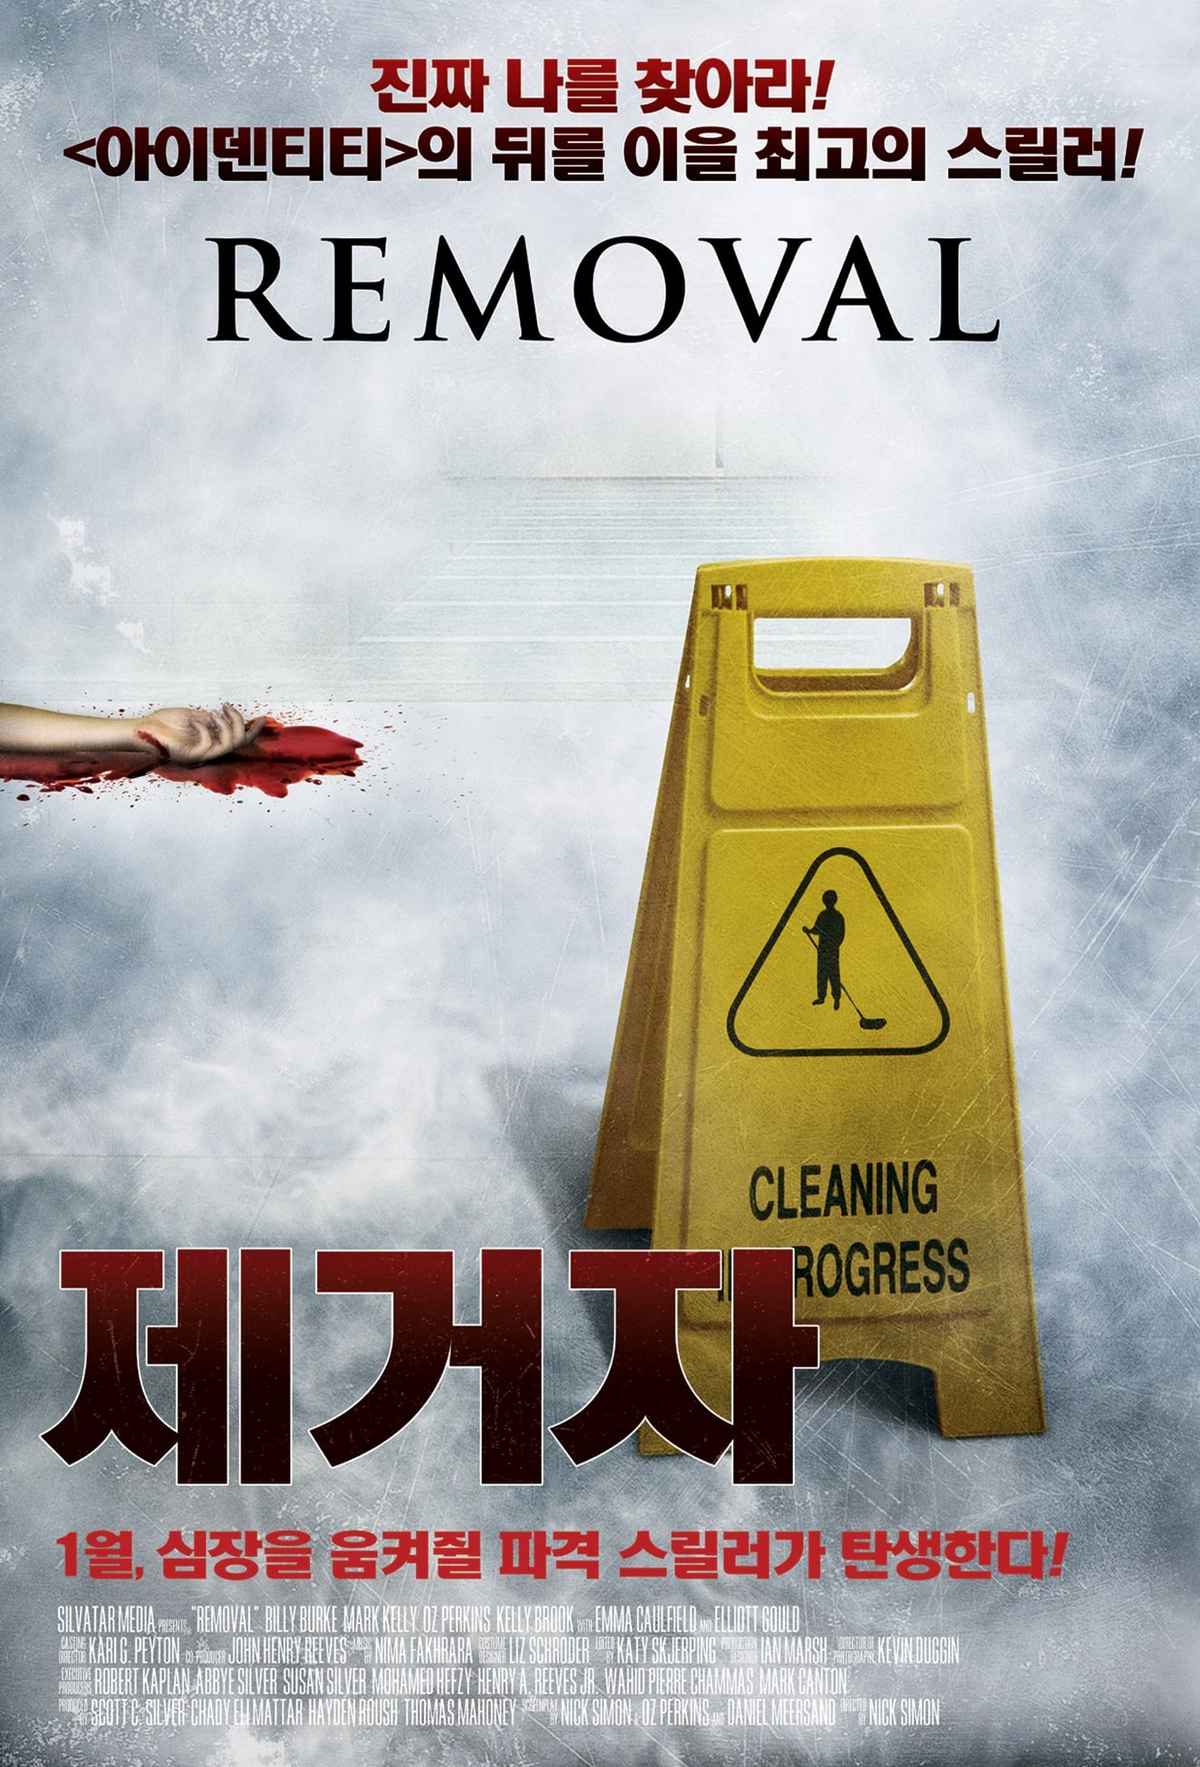 Removal